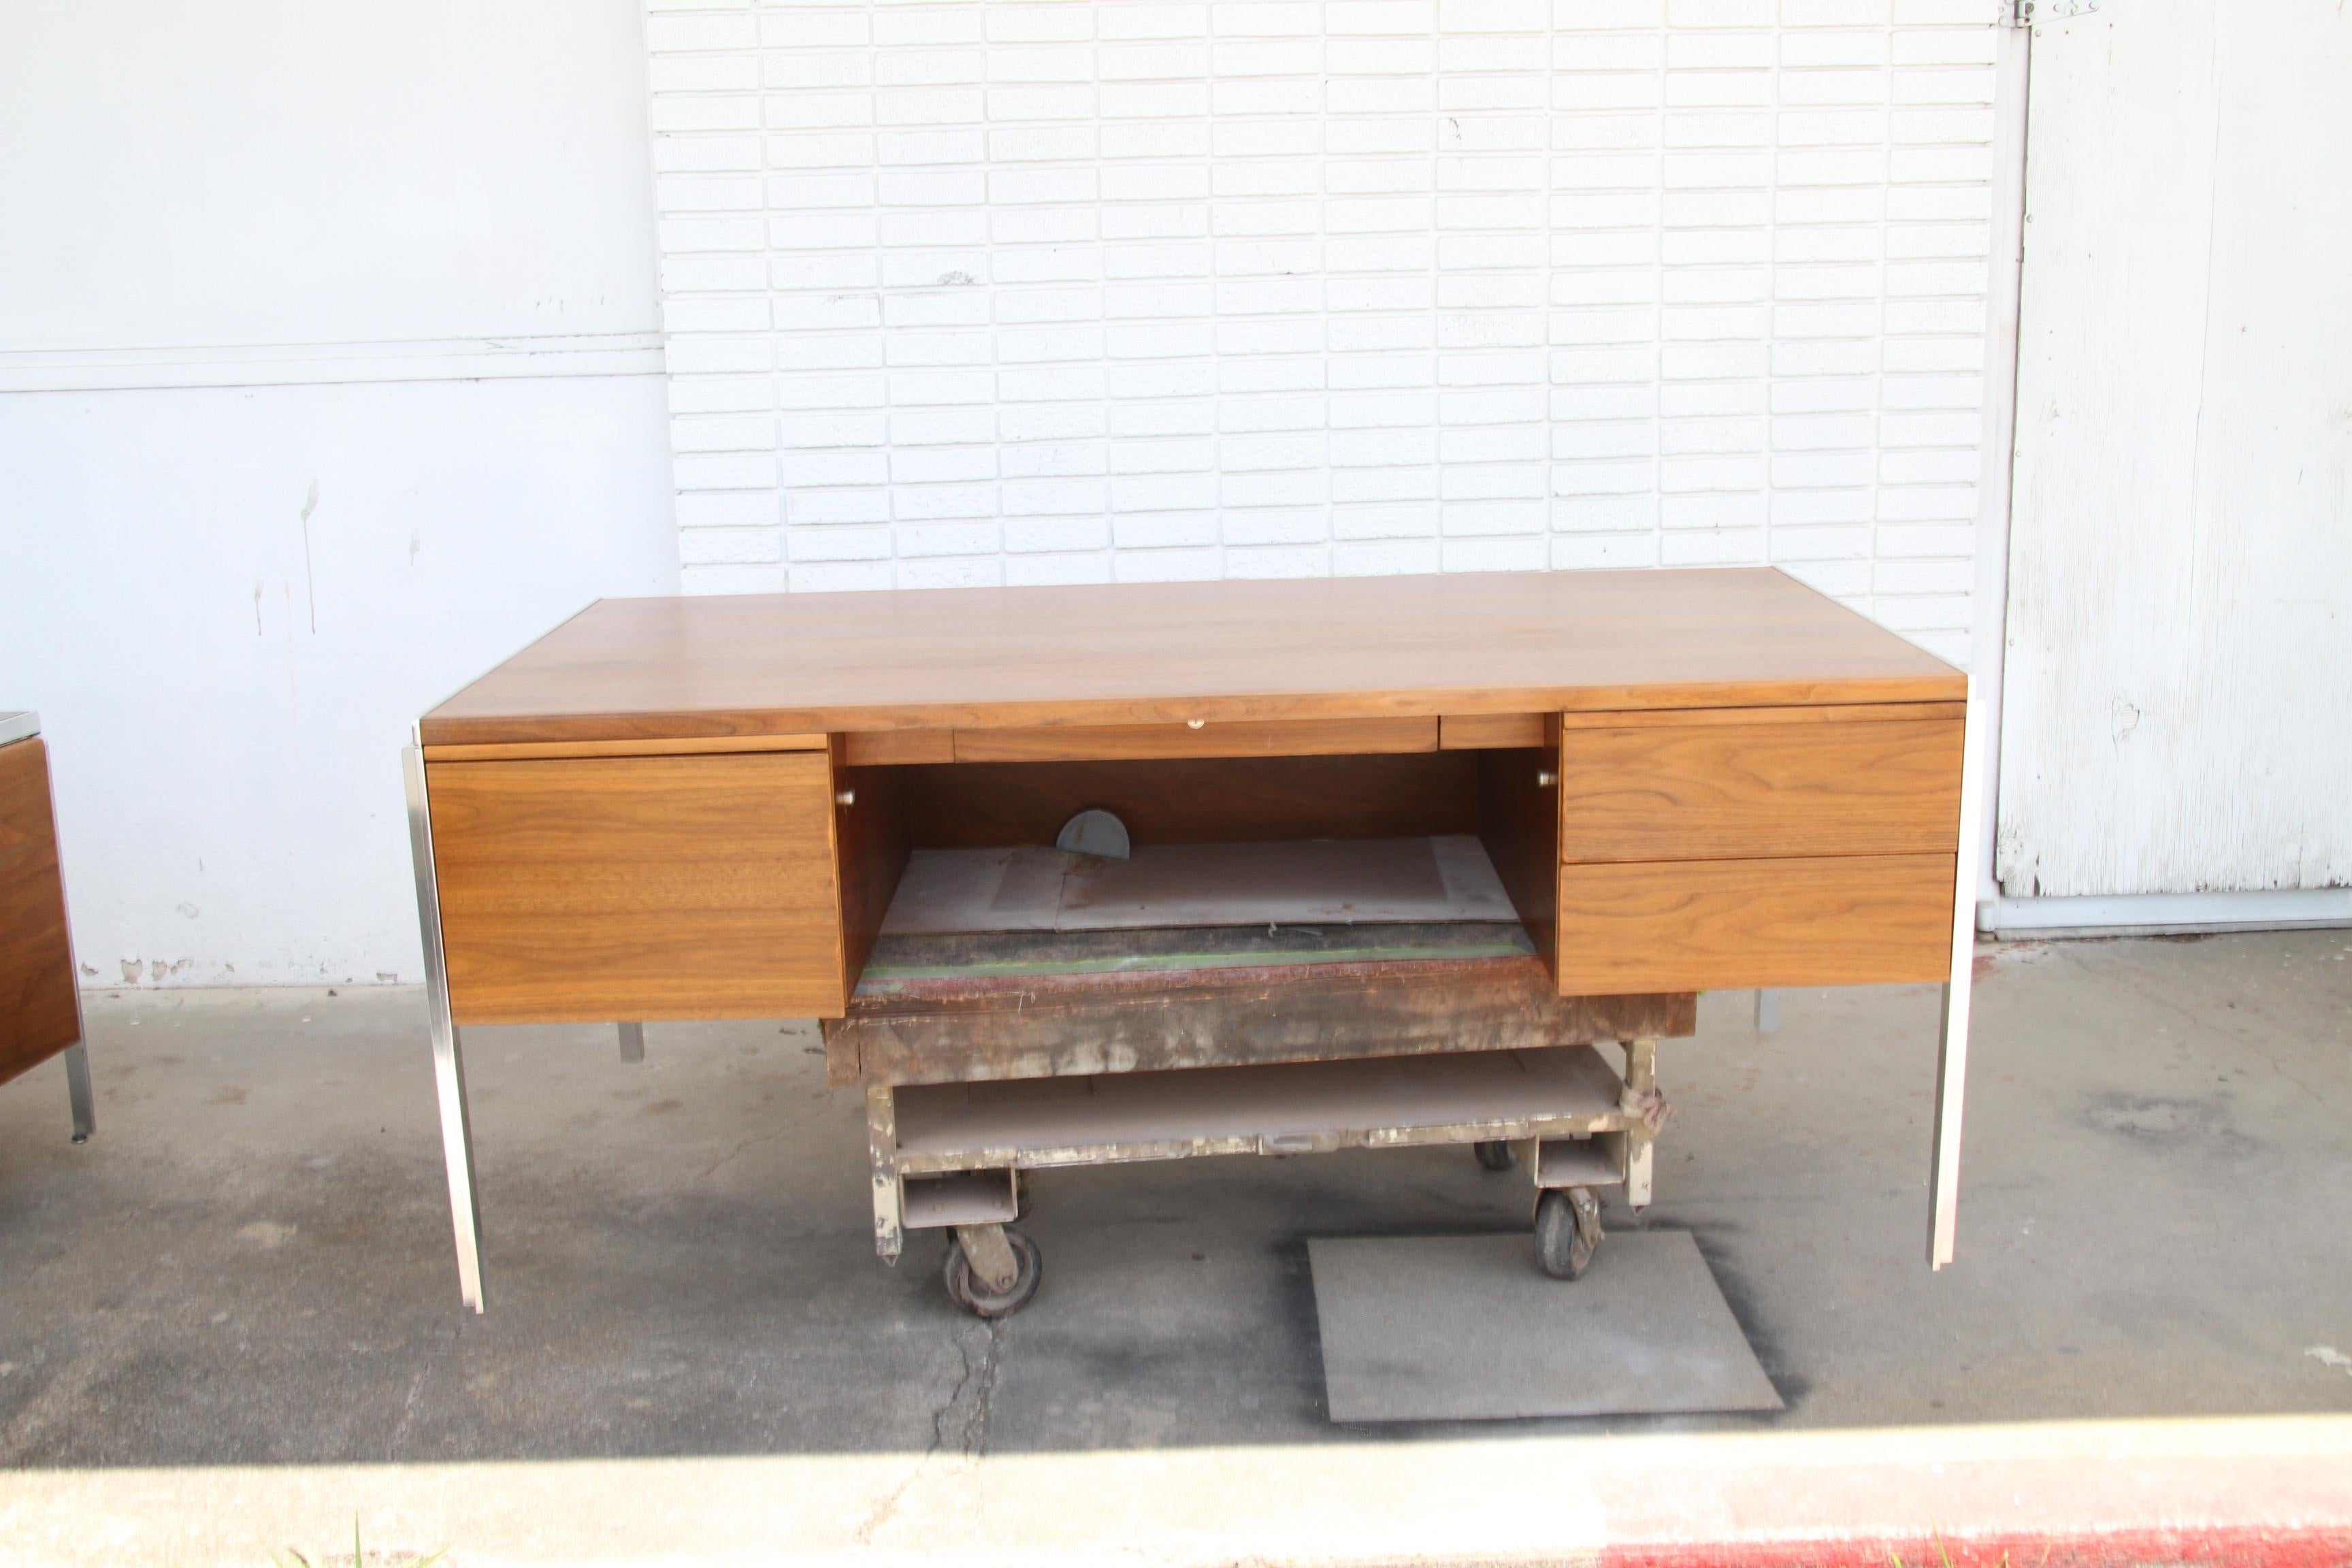 Mid-Century Modern Walnut and Aluminium Desk by Alexis Yermakov for Stow Davis
1970s

Clean lines with aluminium accents, this minimalist design features ample leg room, 4 drawers (one file)  and a pull out tablet work surface. 

See credenza also